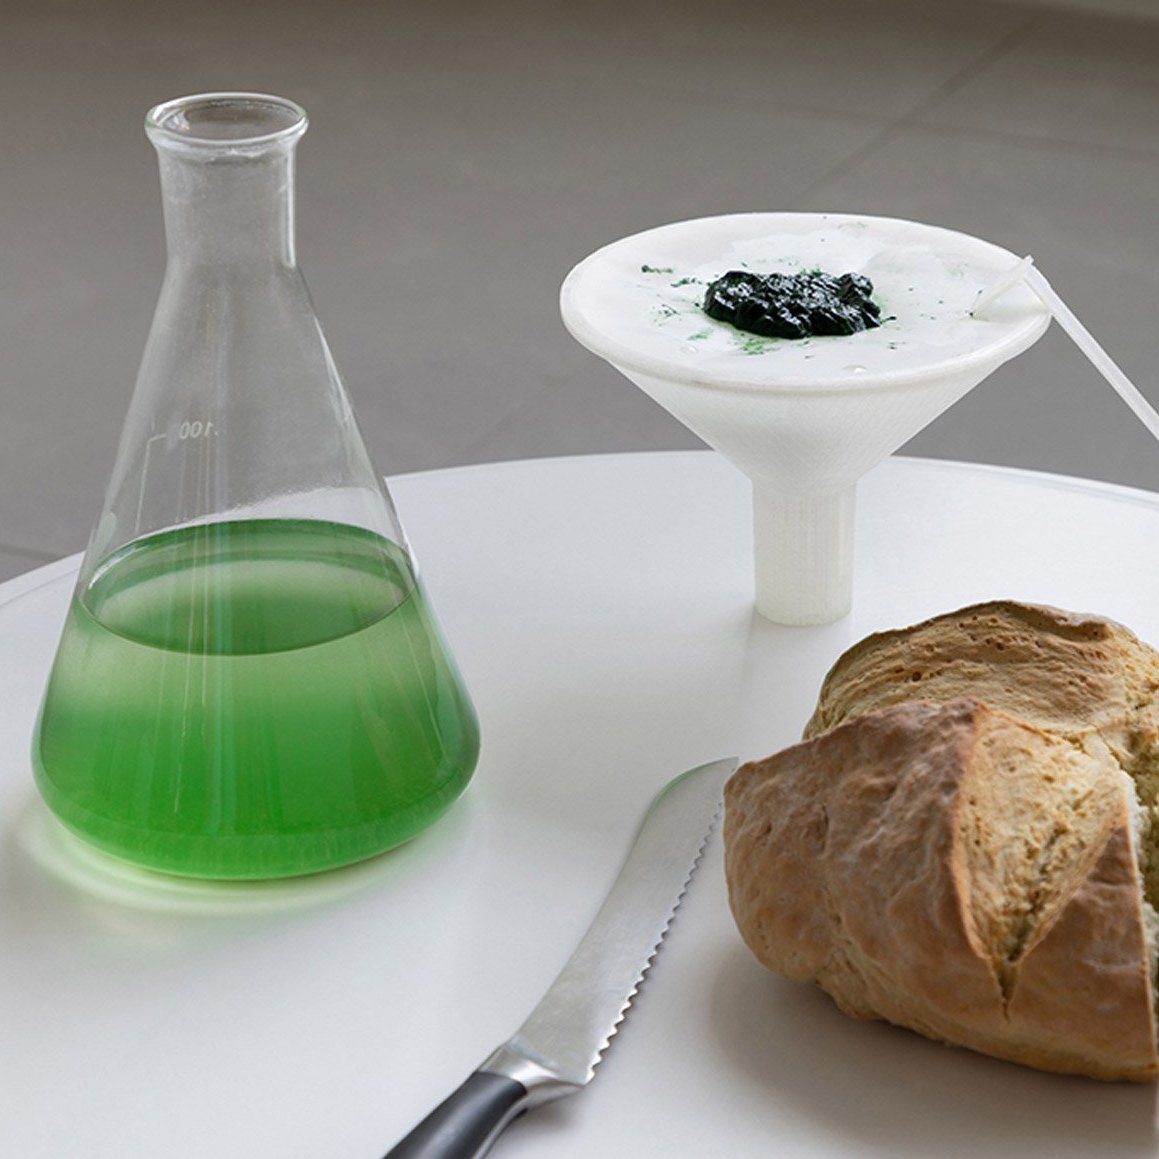 The DIY kit can be used by families at home to cultivate a strain of Spirulina.